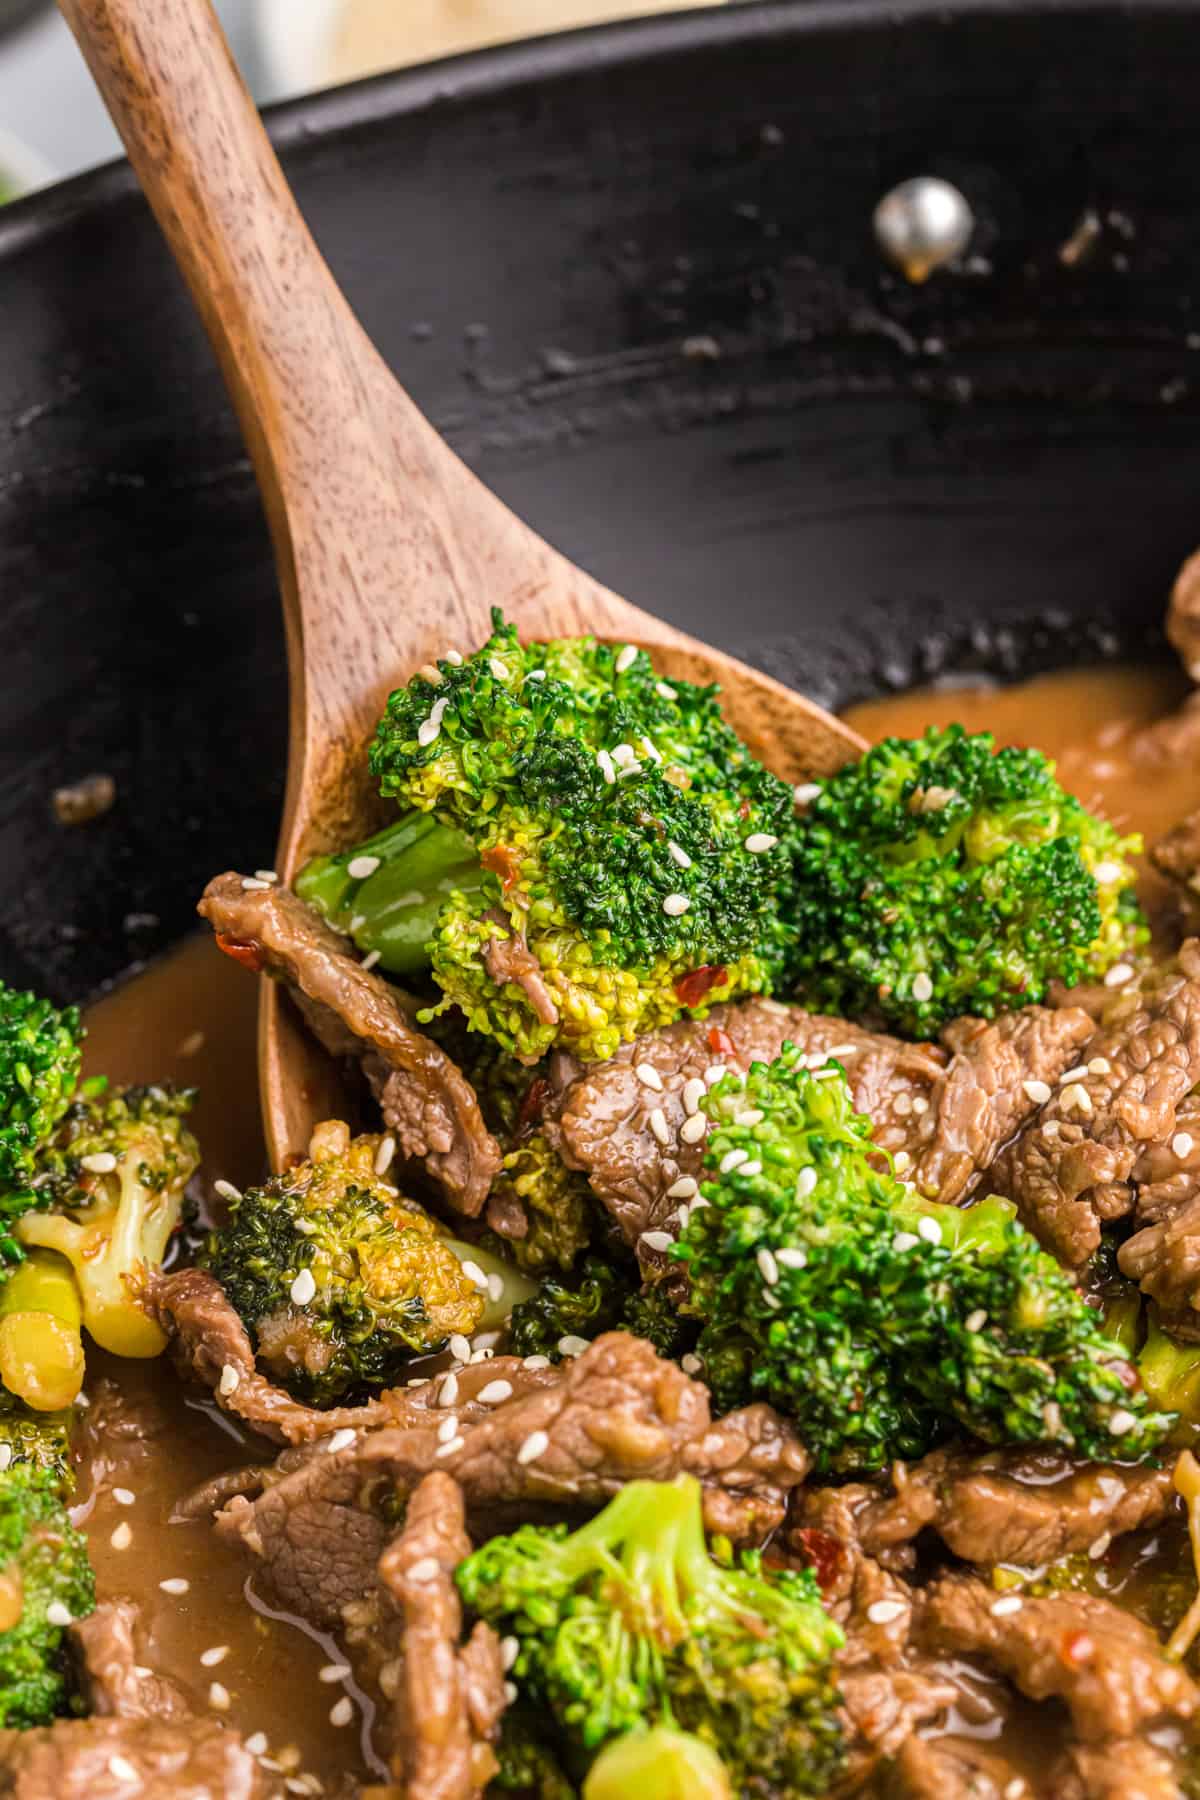 A wooden spoon is lifting a small portion of beef and brococli from the pan.